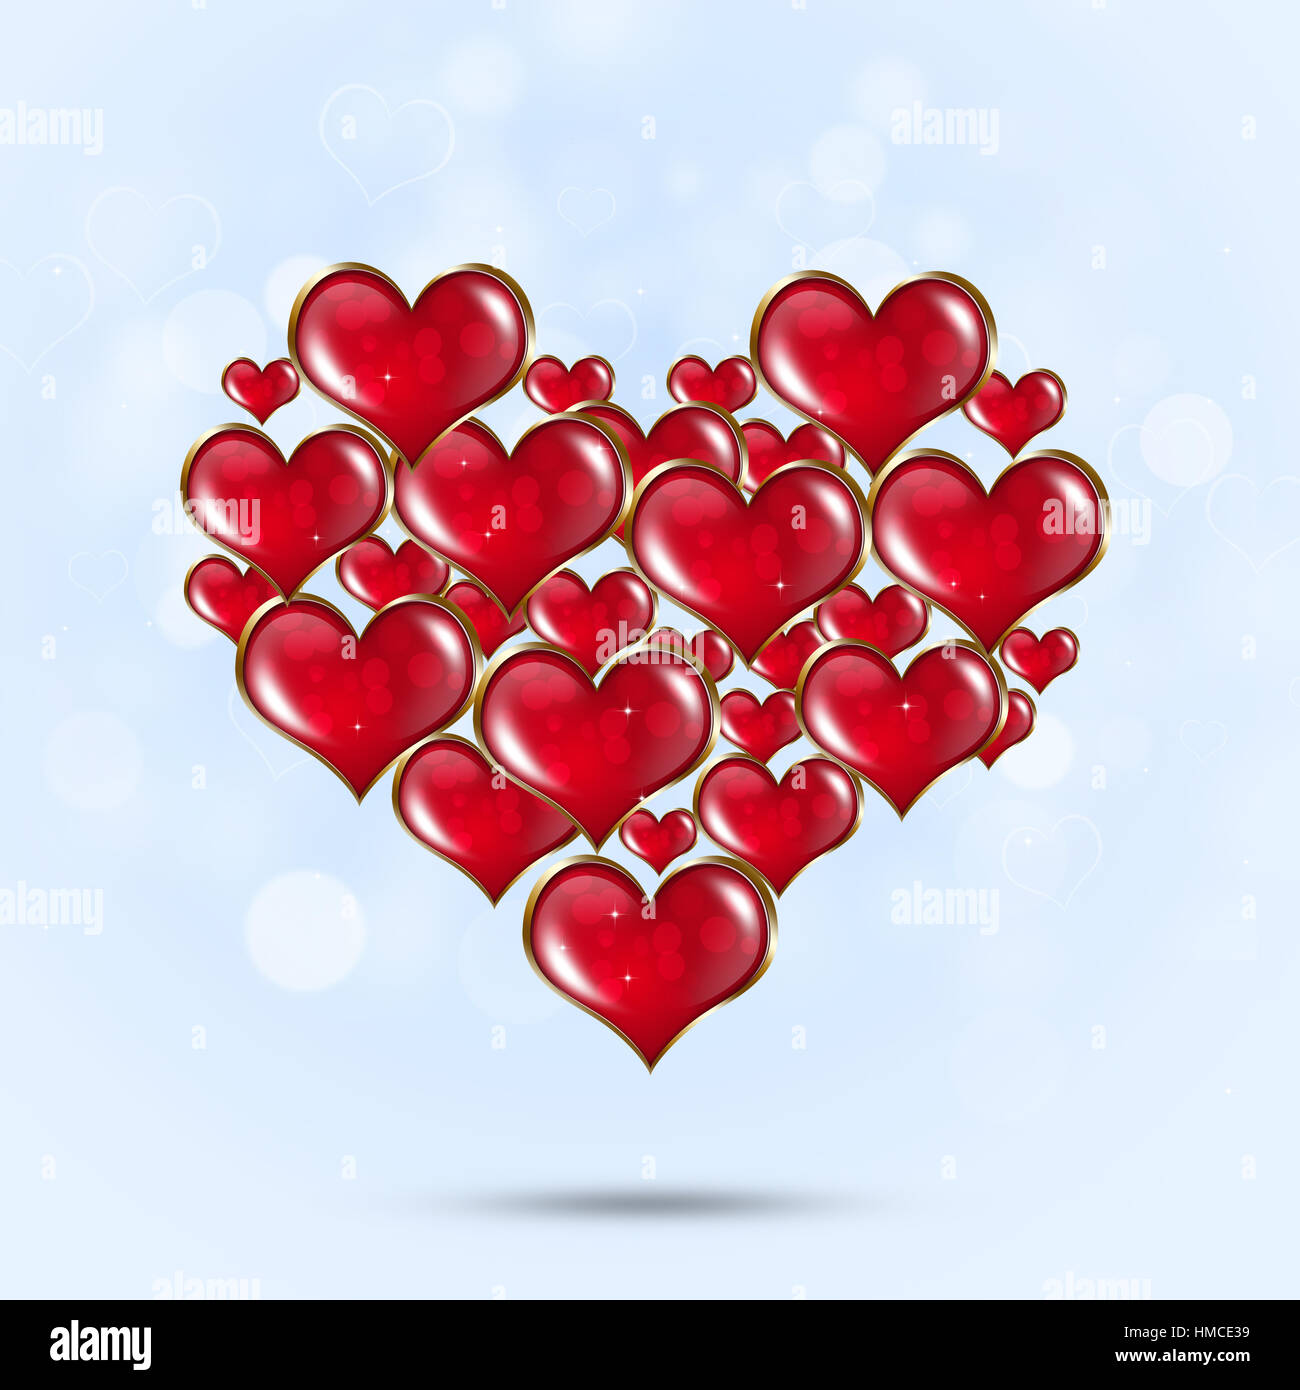 valentines holiday greeting card with red hearts stars Stock Photo